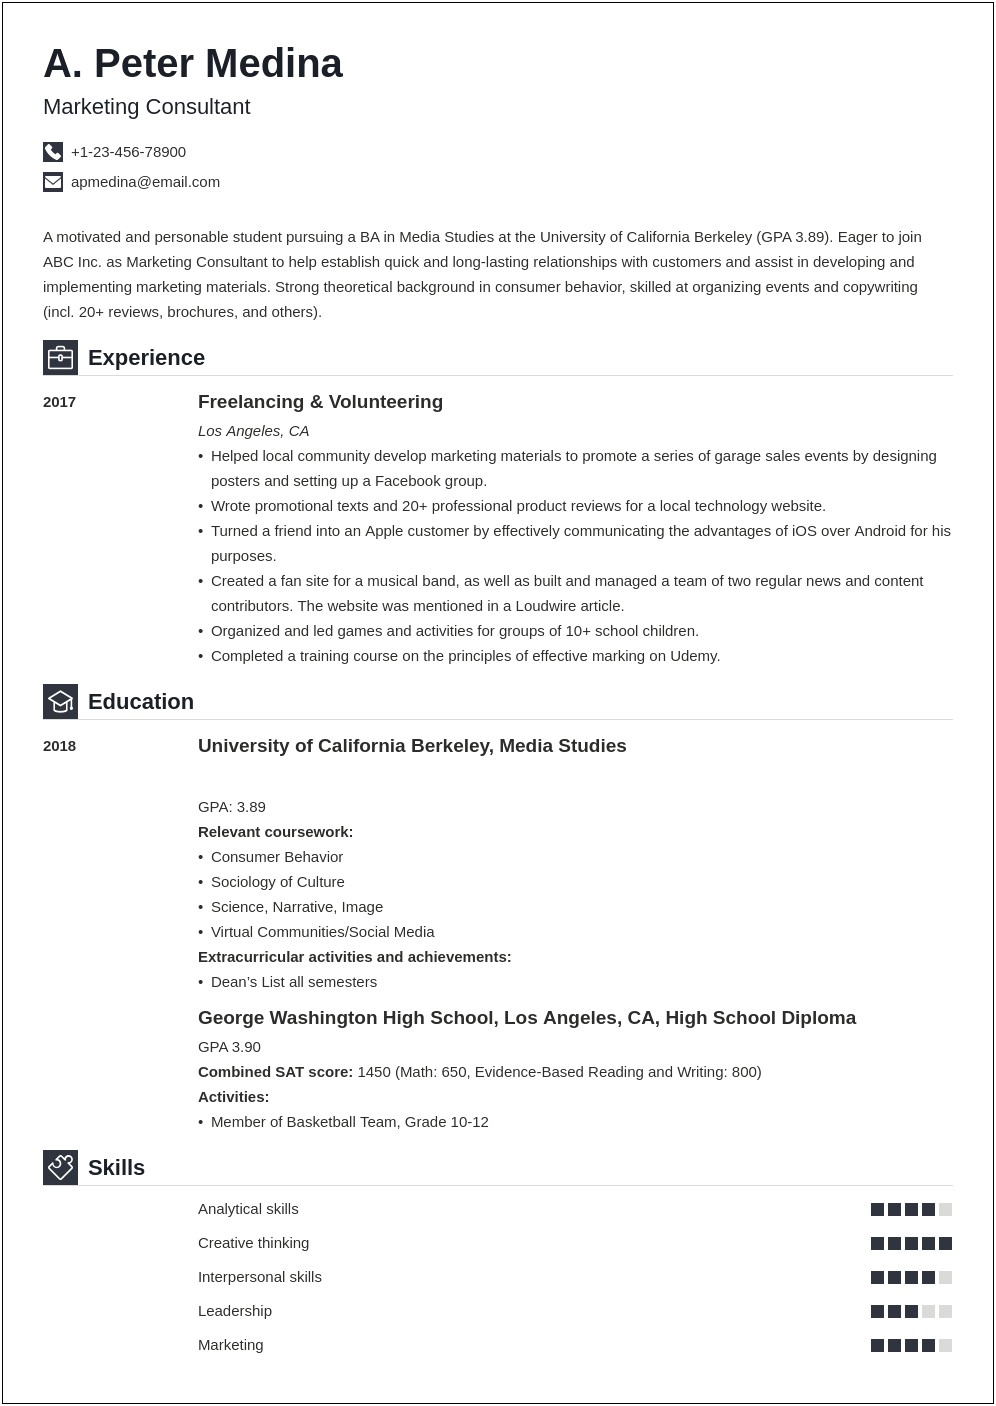 Resume Extracurricular Activities Or More Info About Experience